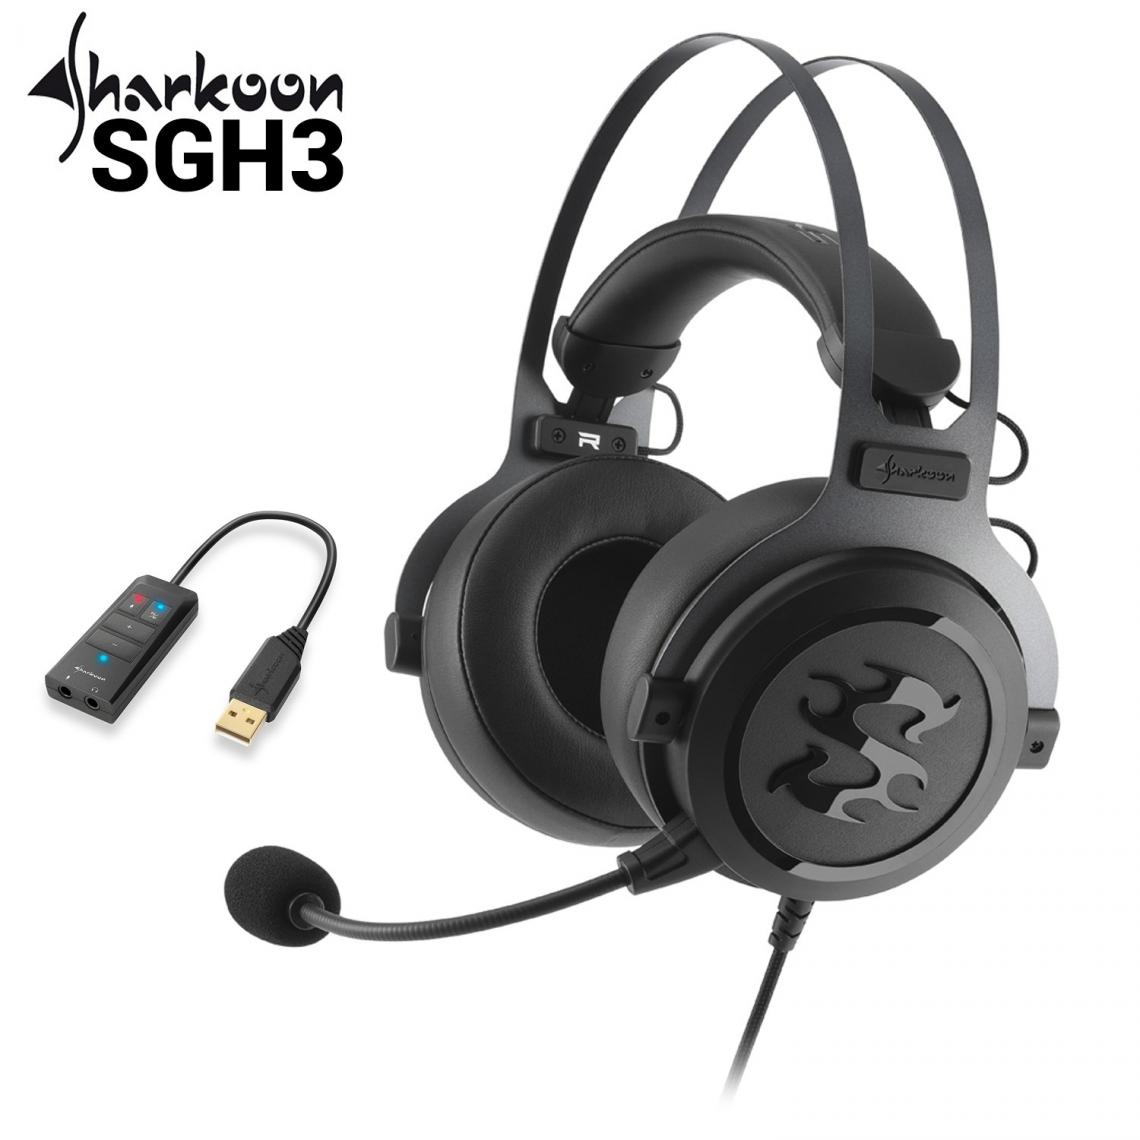 Sharkoon - Casque audio Sharkoon SGH3 gaming pour PC / PS4 / Xbox one - 53mm - Carte son SB1 - Casque